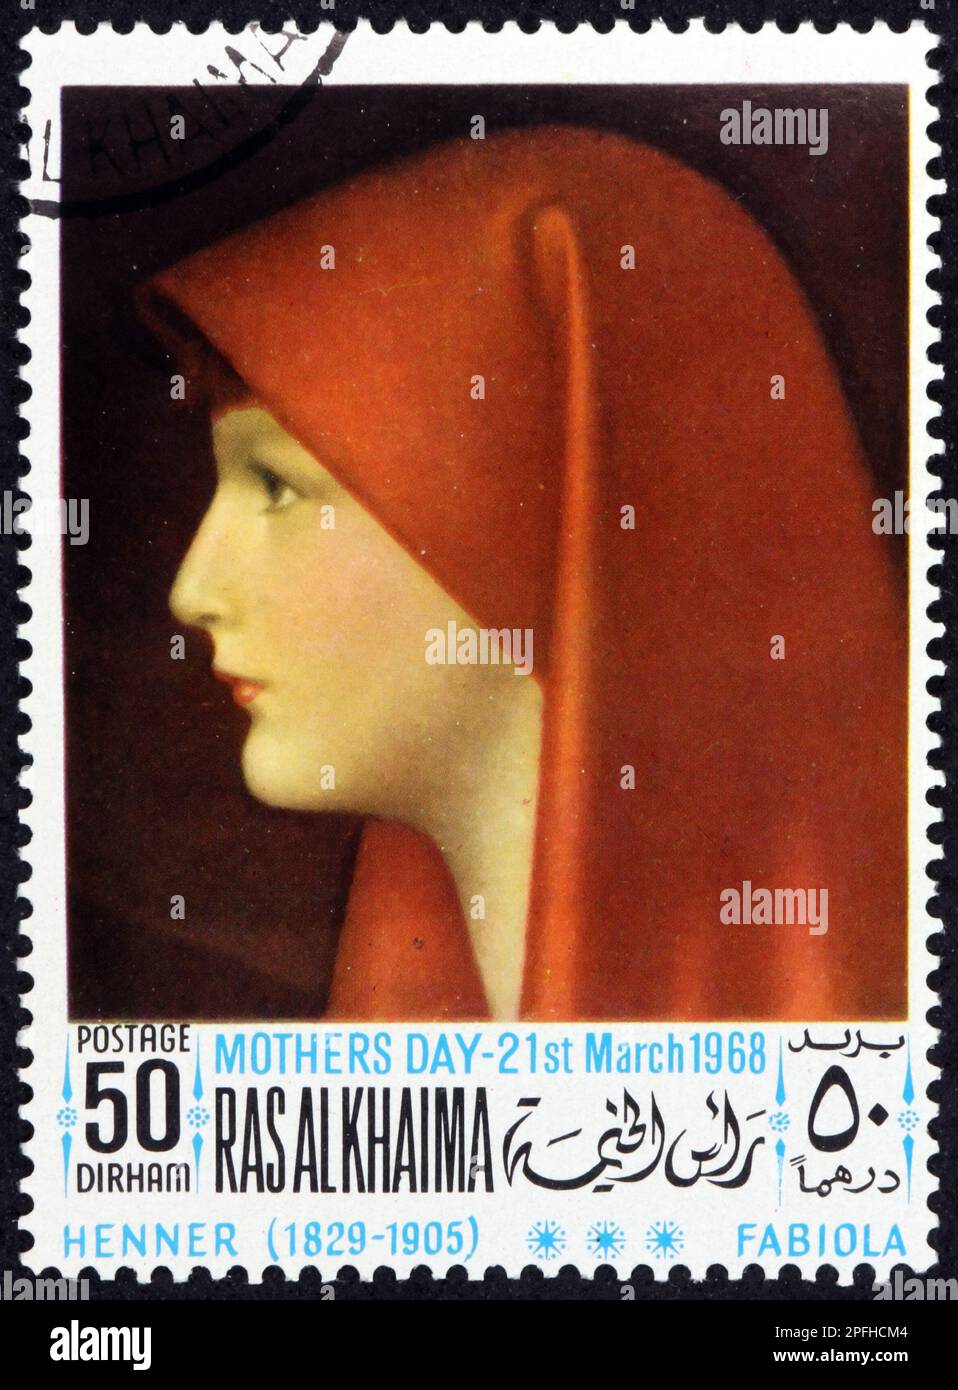 RAS AL-KHAIMAH - CIRCA 1968: a stamp printed in Ras al-Khaimah shows Fabiola with red headscarf, portrait, painting by Jean-Jacques Henner (1829-1905) Stock Photo